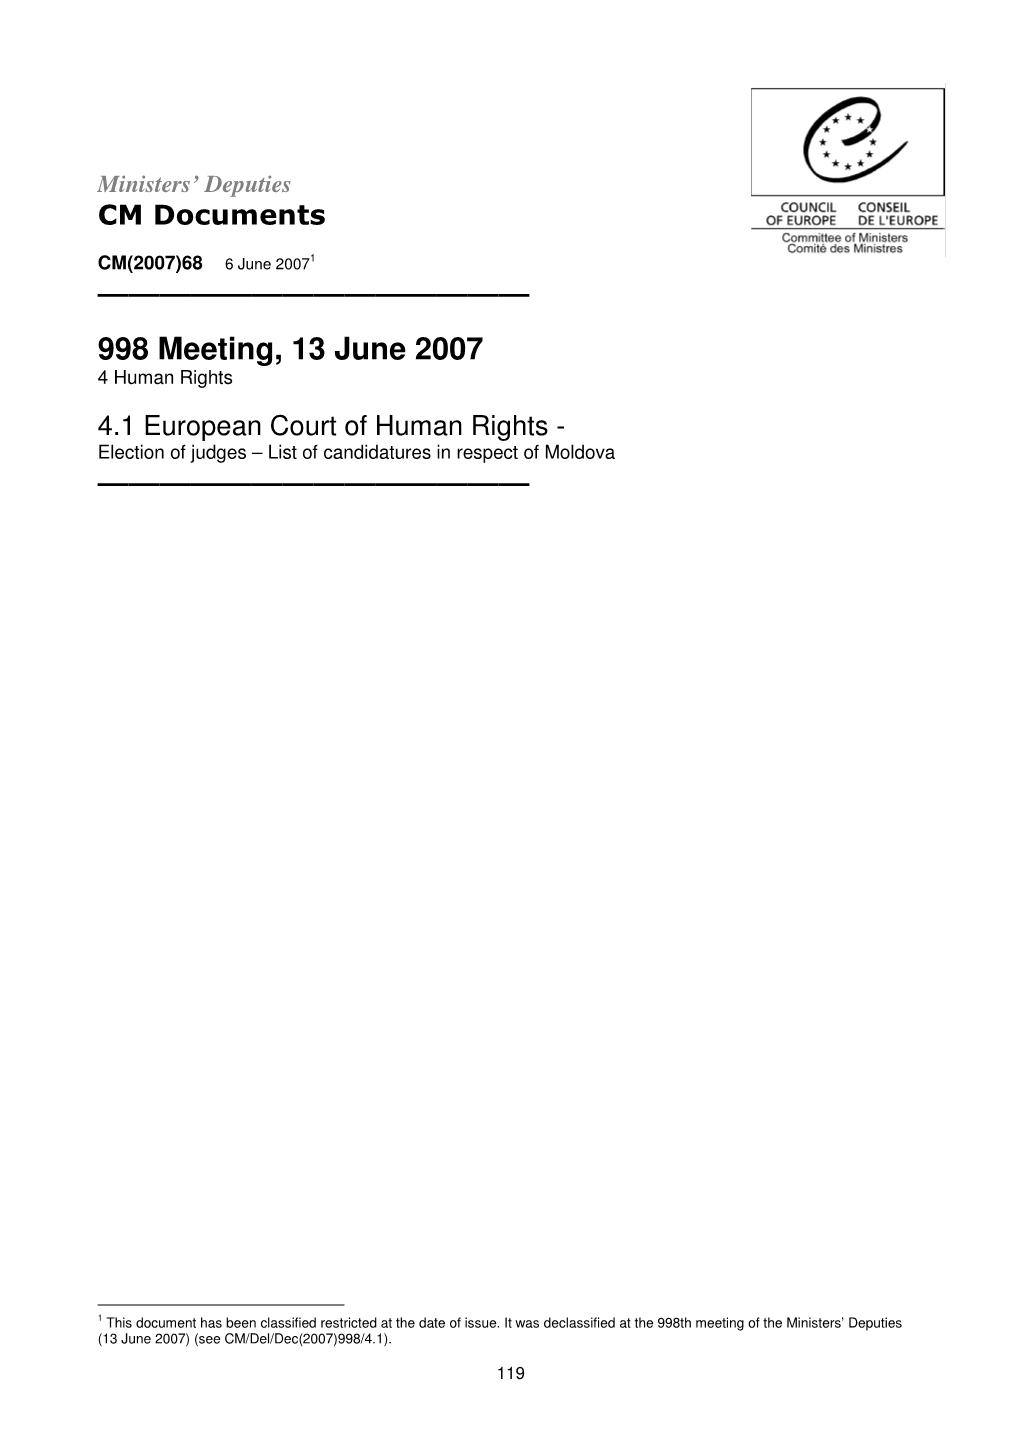 Election of Judges to the European Court of Human Rights